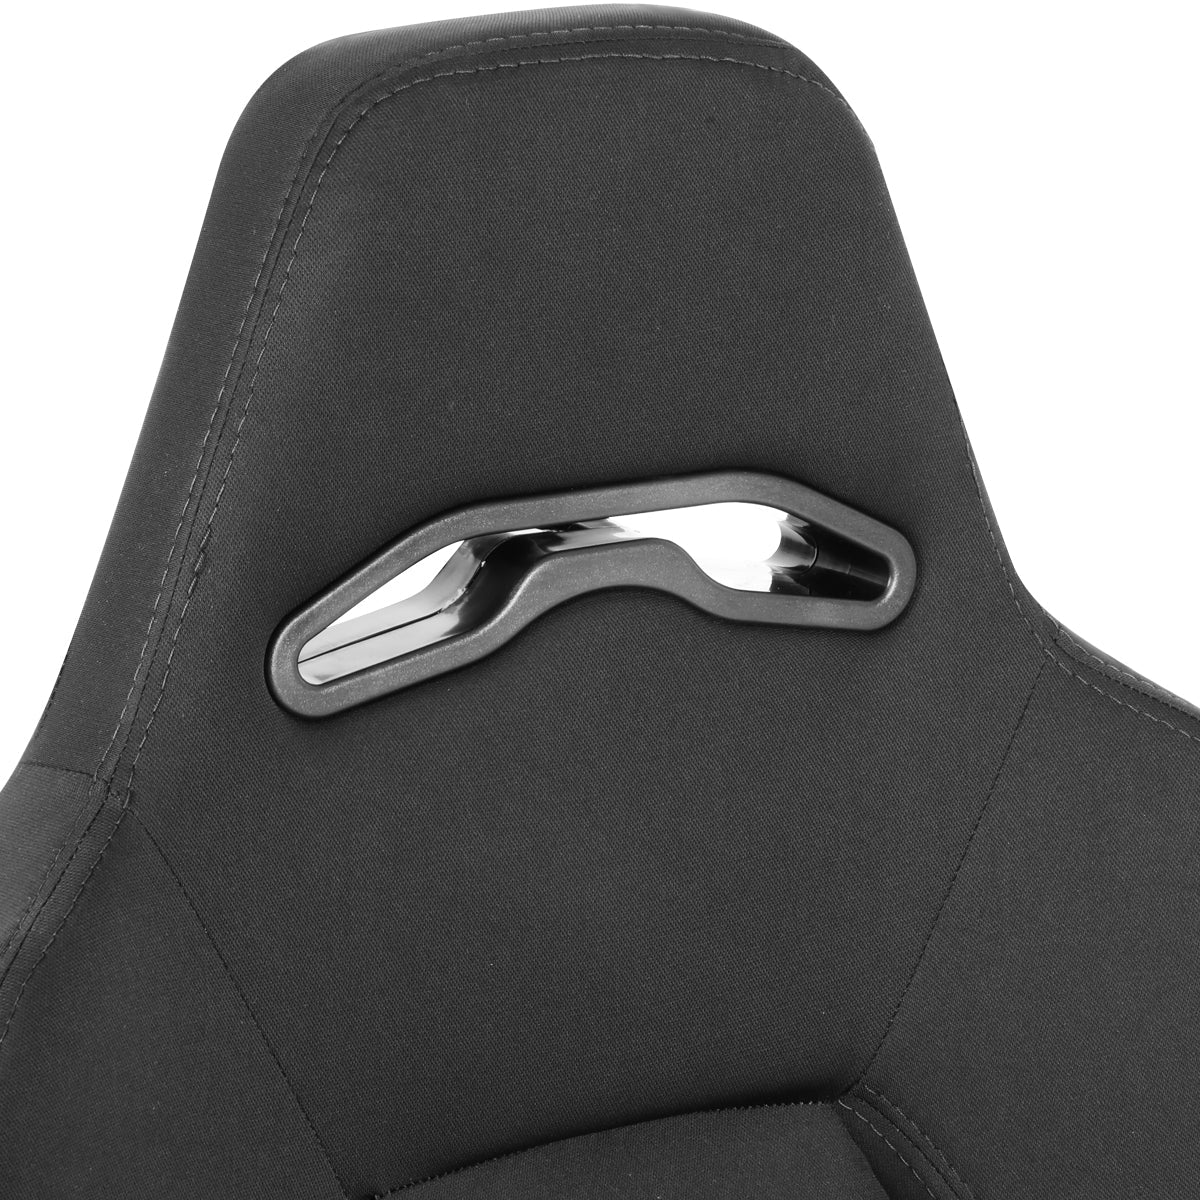 Right / Passenger Side Reclinable Woven Fabric Racing Seat